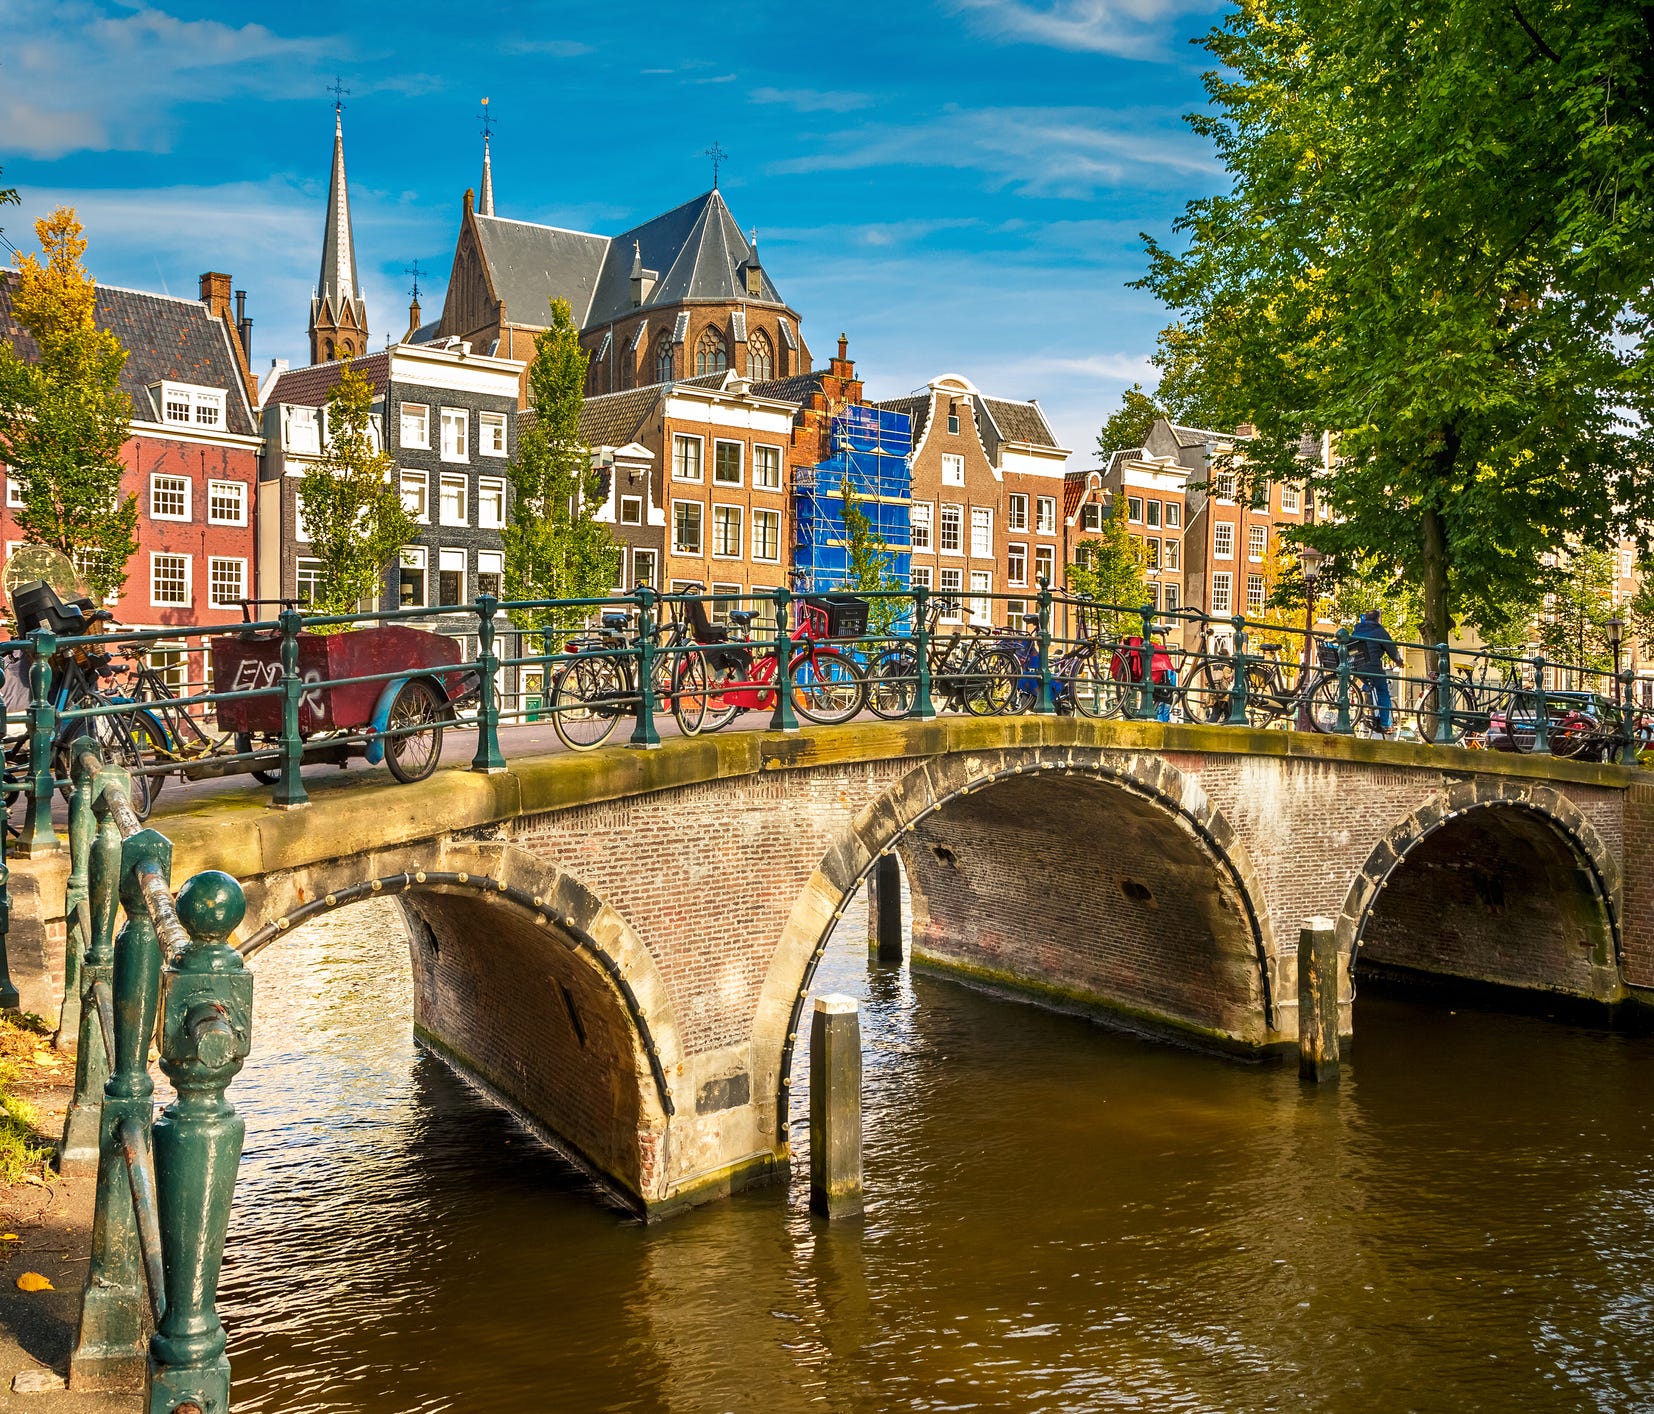 Amsterdam: Summer is beach party season in Amsterdam. You'll find beautiful people soaking in the sun everywhere from bohemian urban beaches to swanky rooftops and terrace bars. Overlooking the riverfront and city center, the Sir Adam Hotel ($222/nig